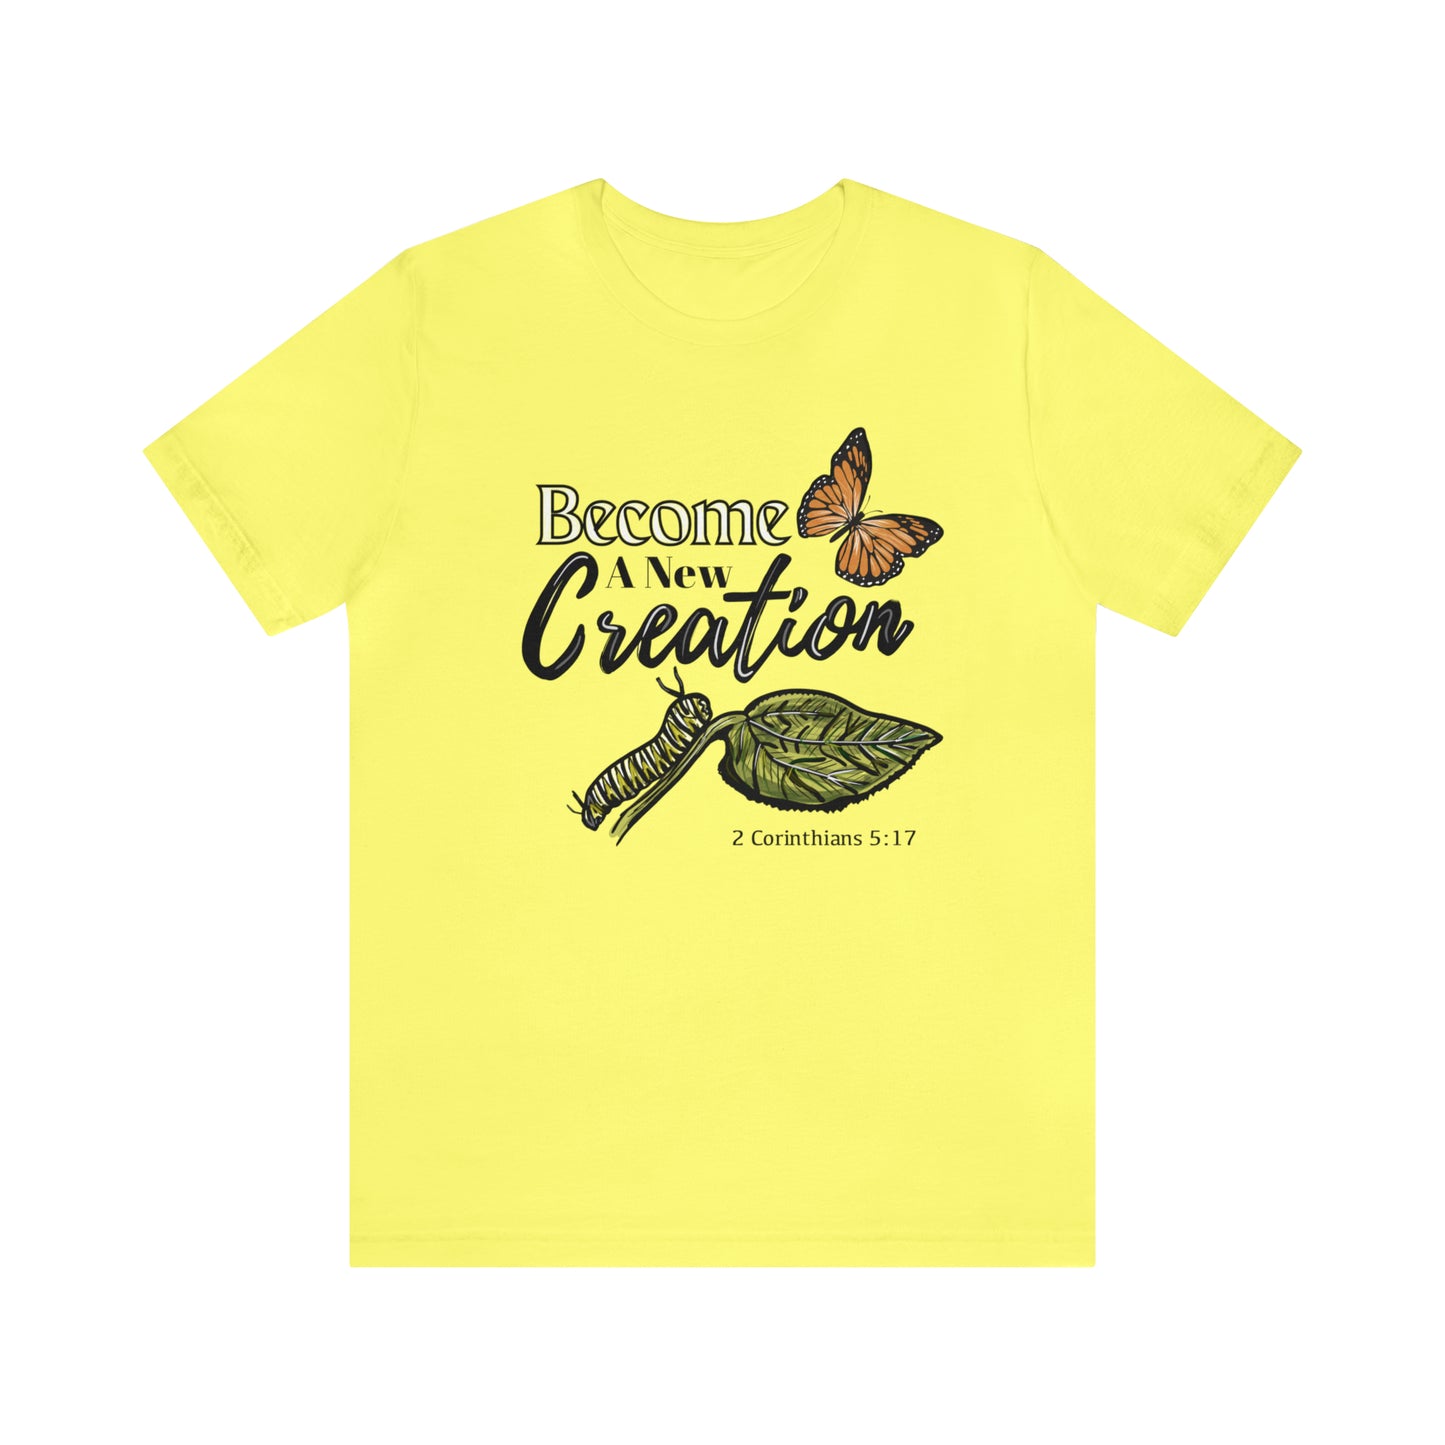 Become a New Creation (Green Pastures Apparel)